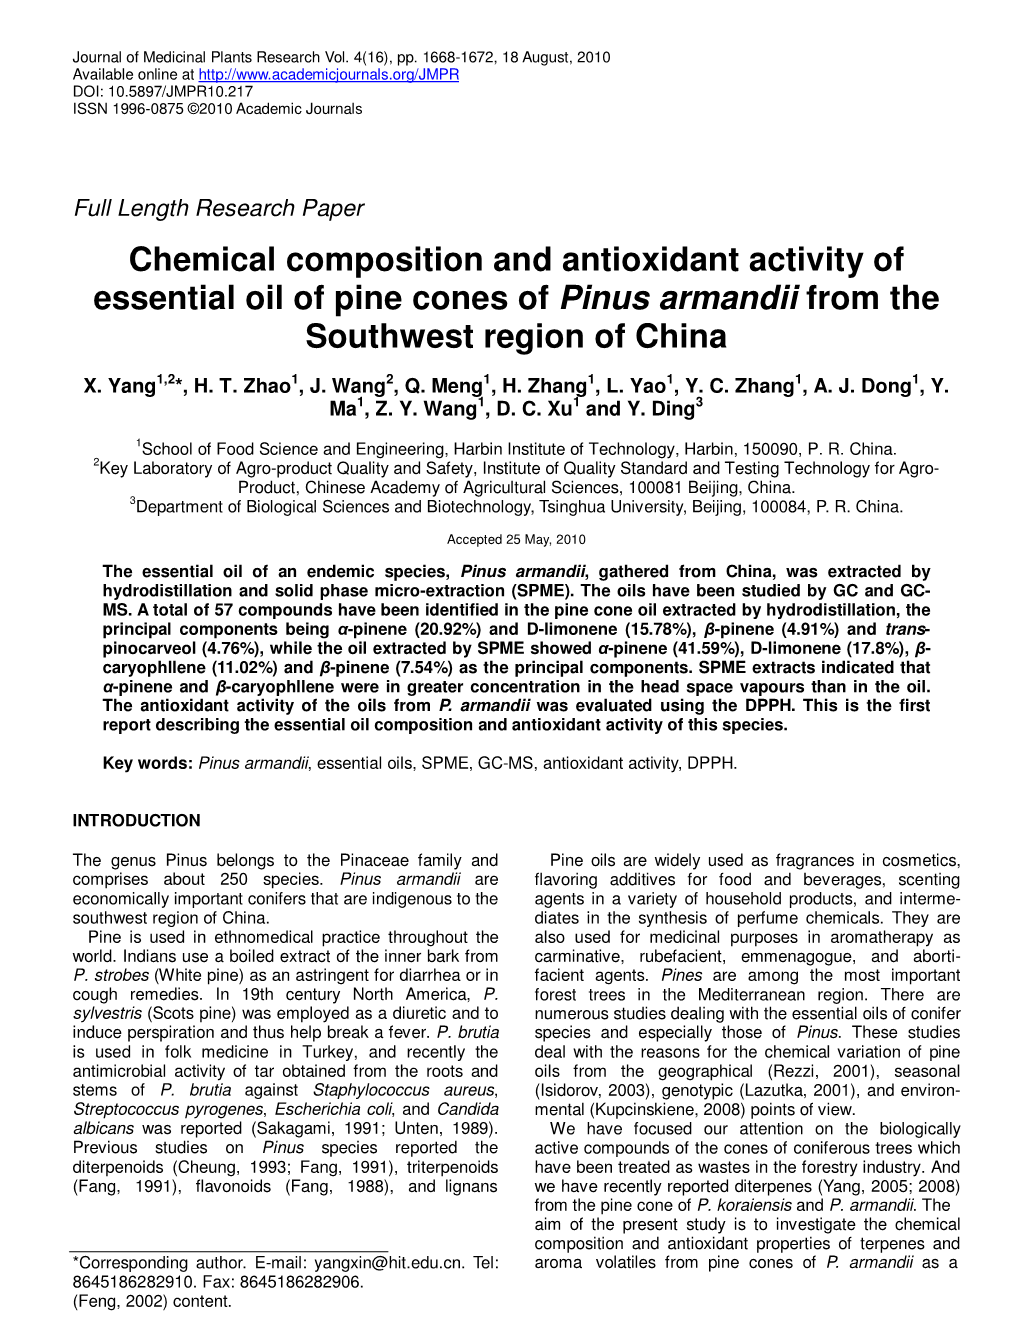 Chemical Composition and Antioxidant Activity of Essential Oil of Pine Cones of Pinus Armandii from the Southwest Region of China